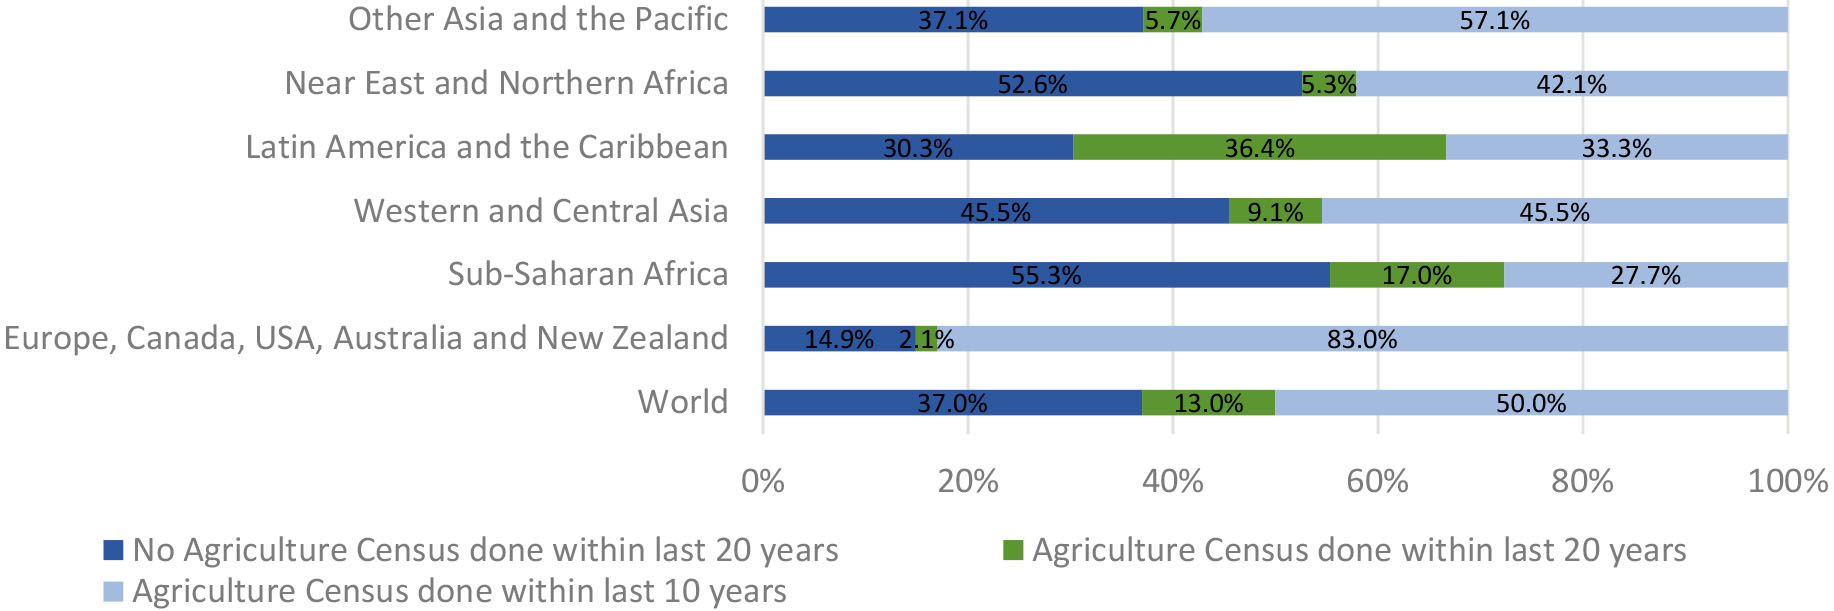 Percentage of countries according to the frequency of their agriculture census in the last 20 years (period covering 2001–2020), per frequency and region (Source: World Bank, Statistical Performance Indicators Database, 2021).